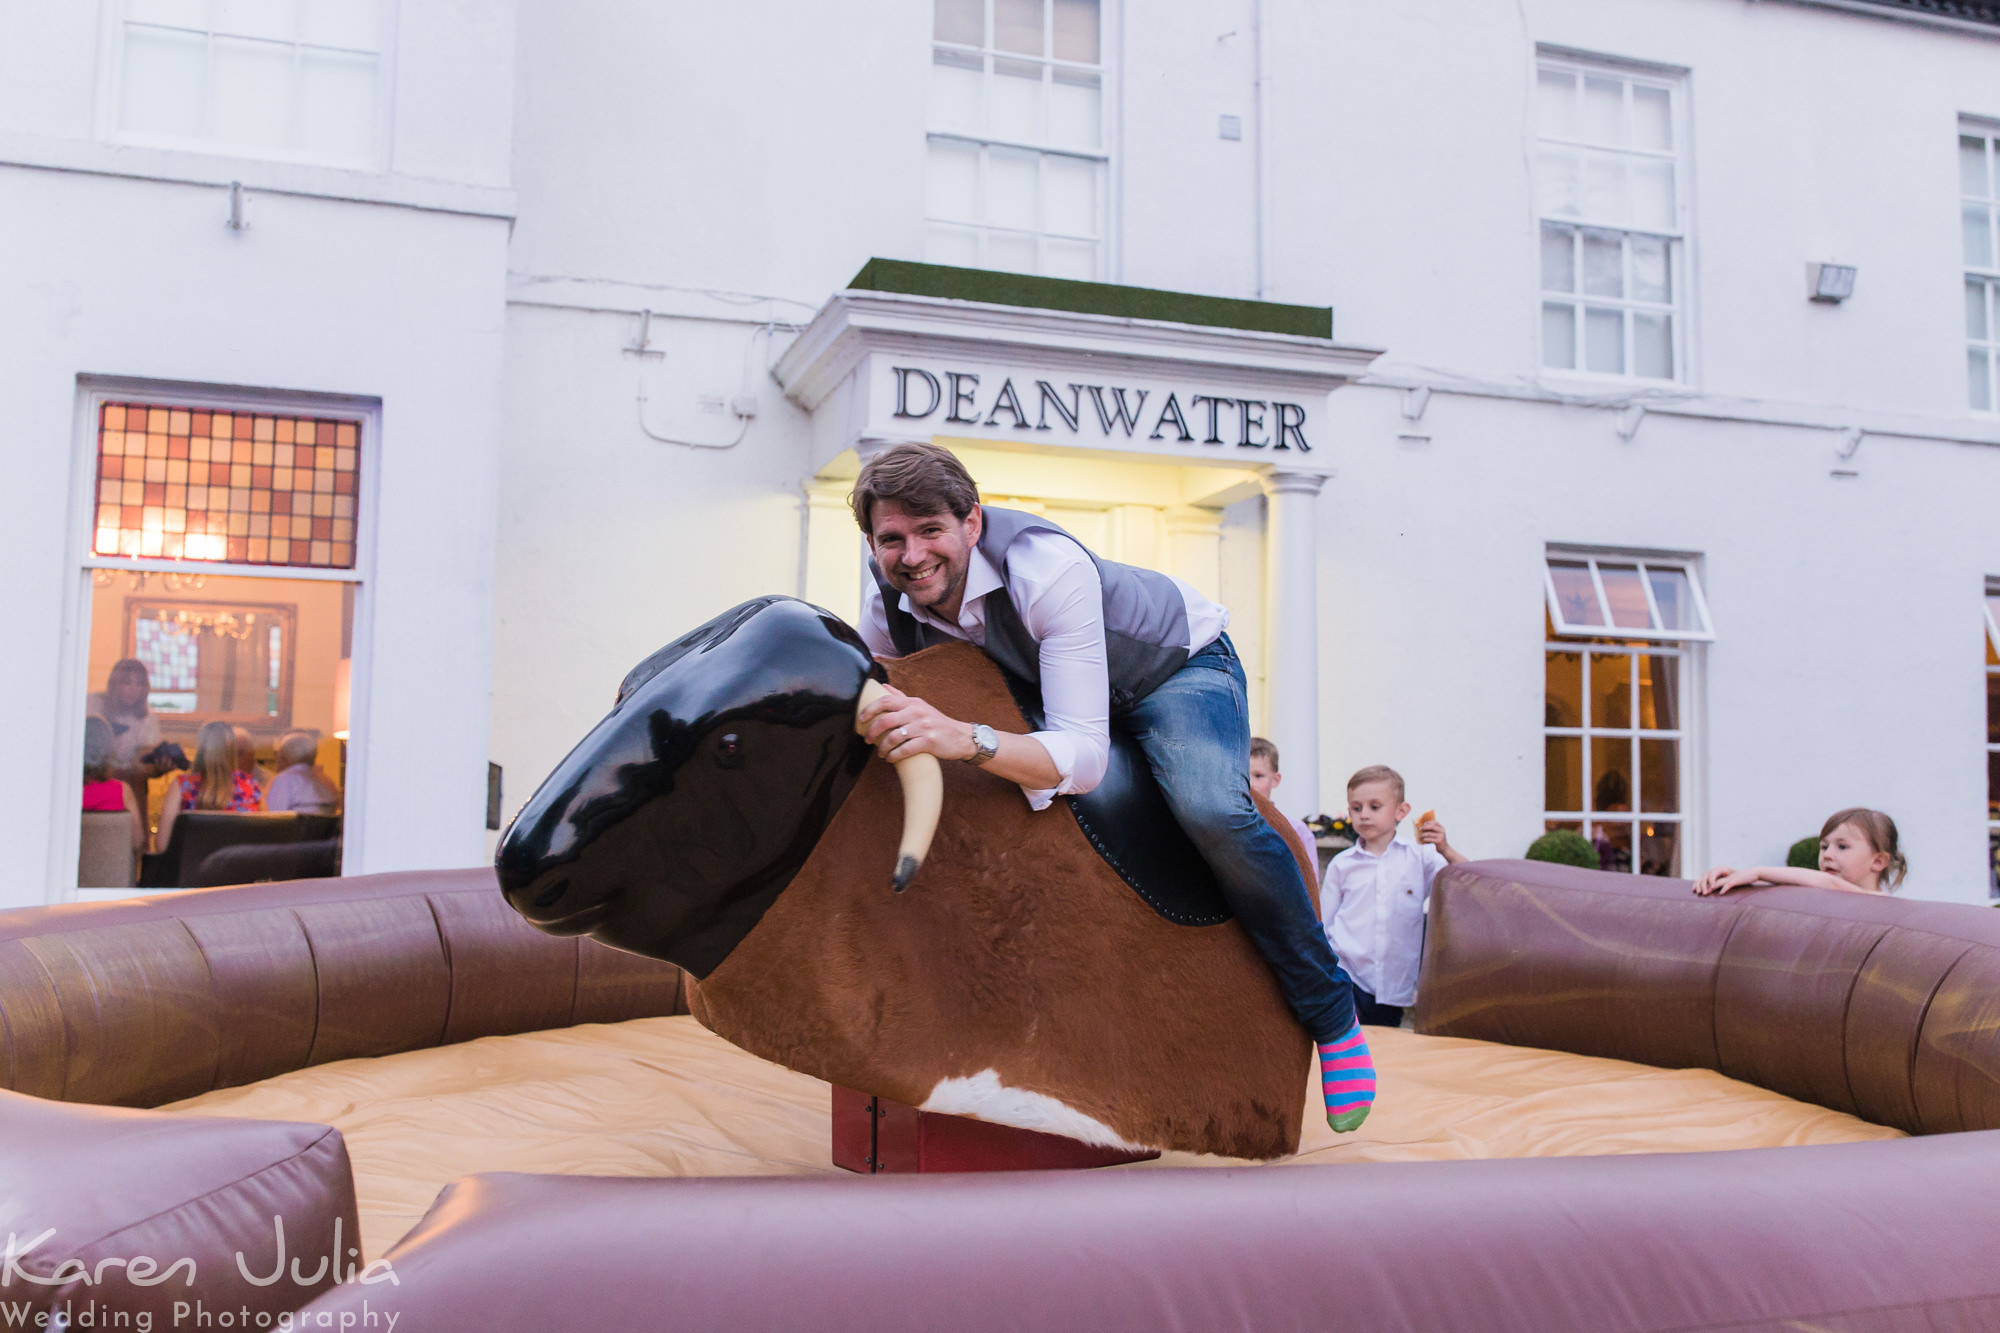 groom on rodeo bull outside the Deanwater hotel at wedding reception